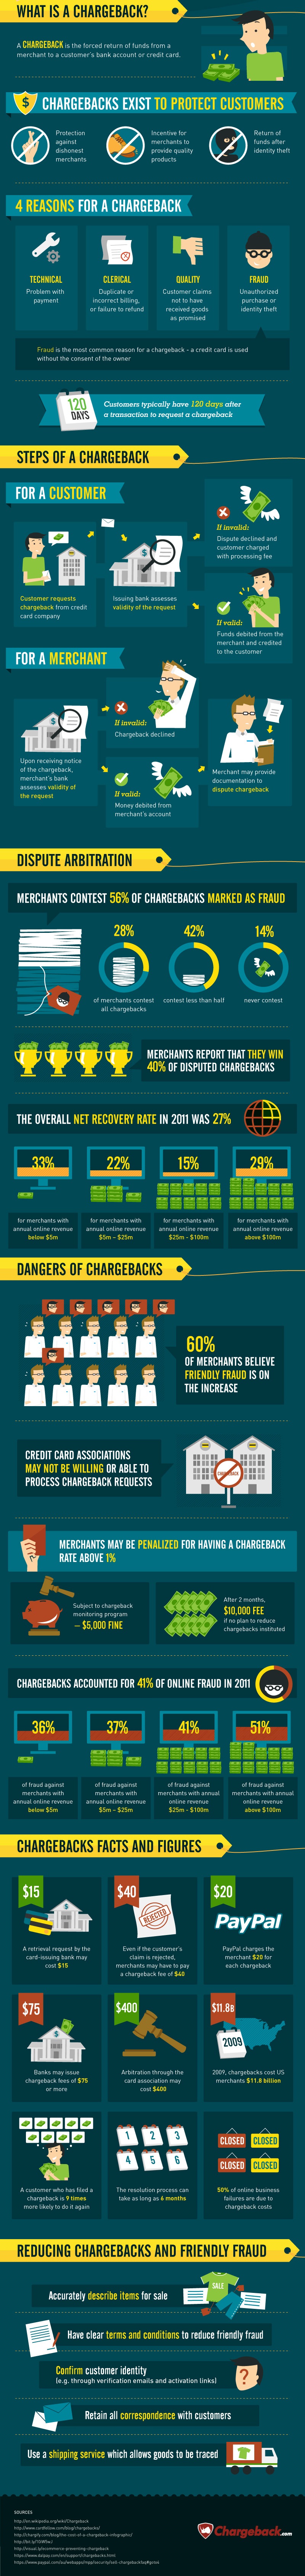 Chargebacks - Customer and Merchant Points of View [Infographic]